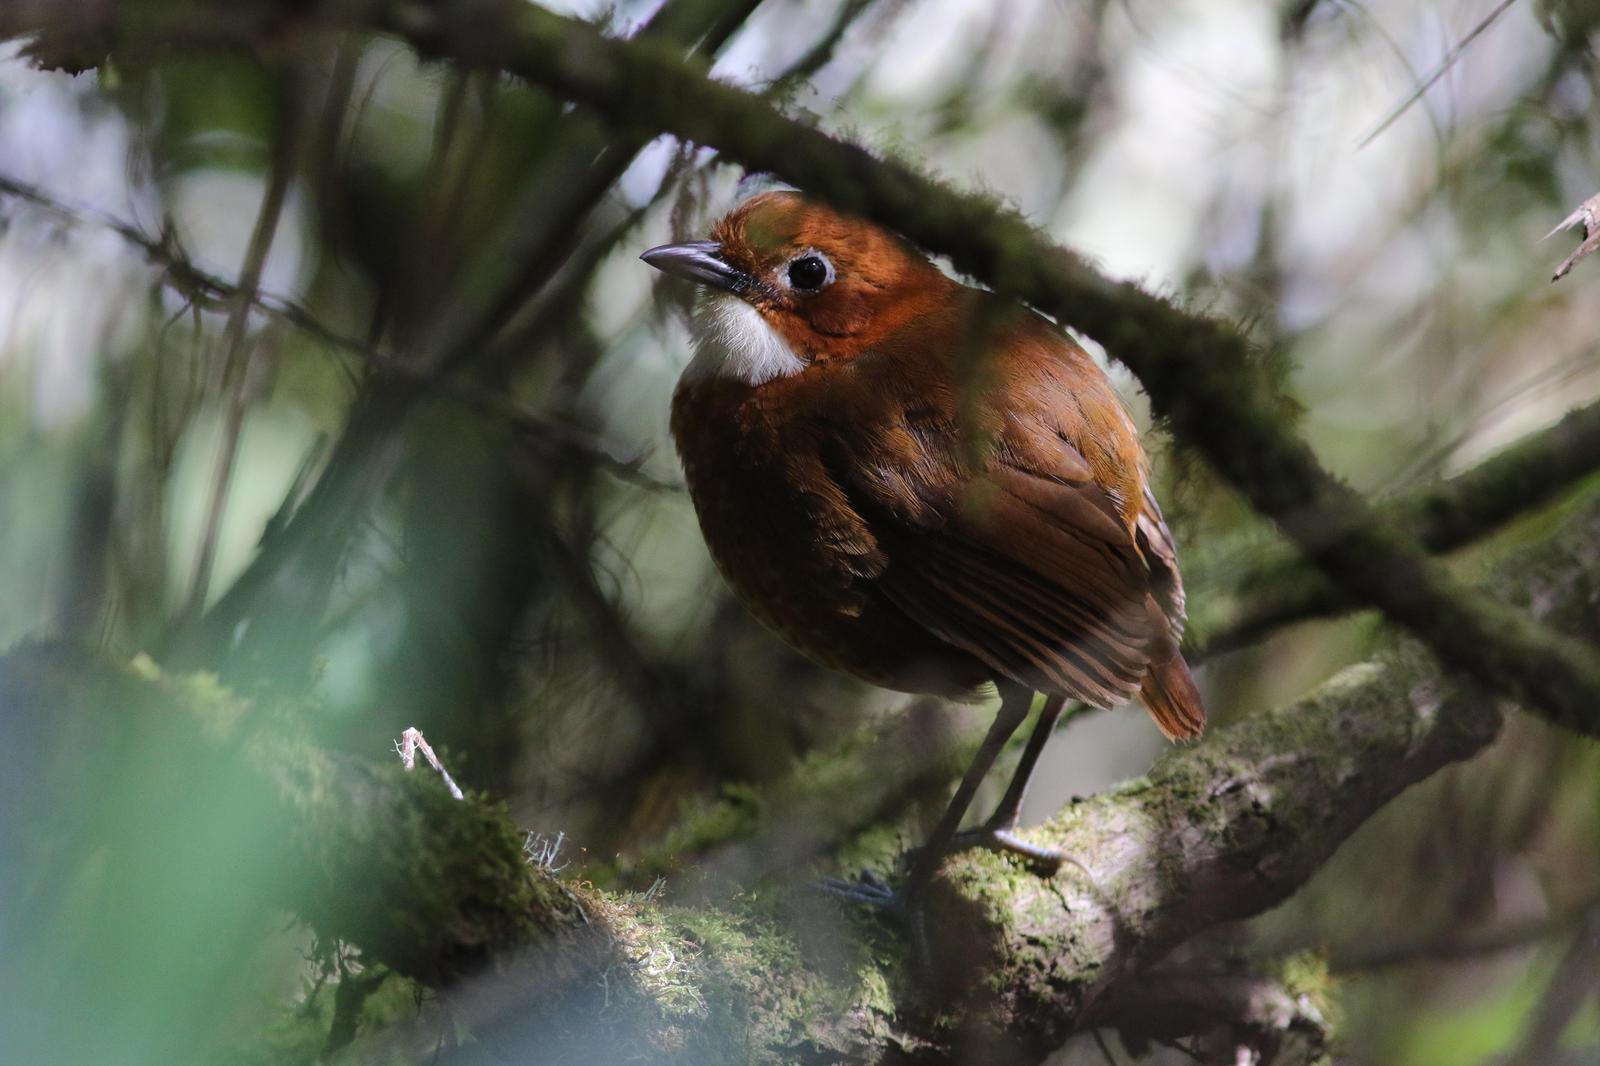 Red-and-white Antpitta Photo by Leonardo Garrigues